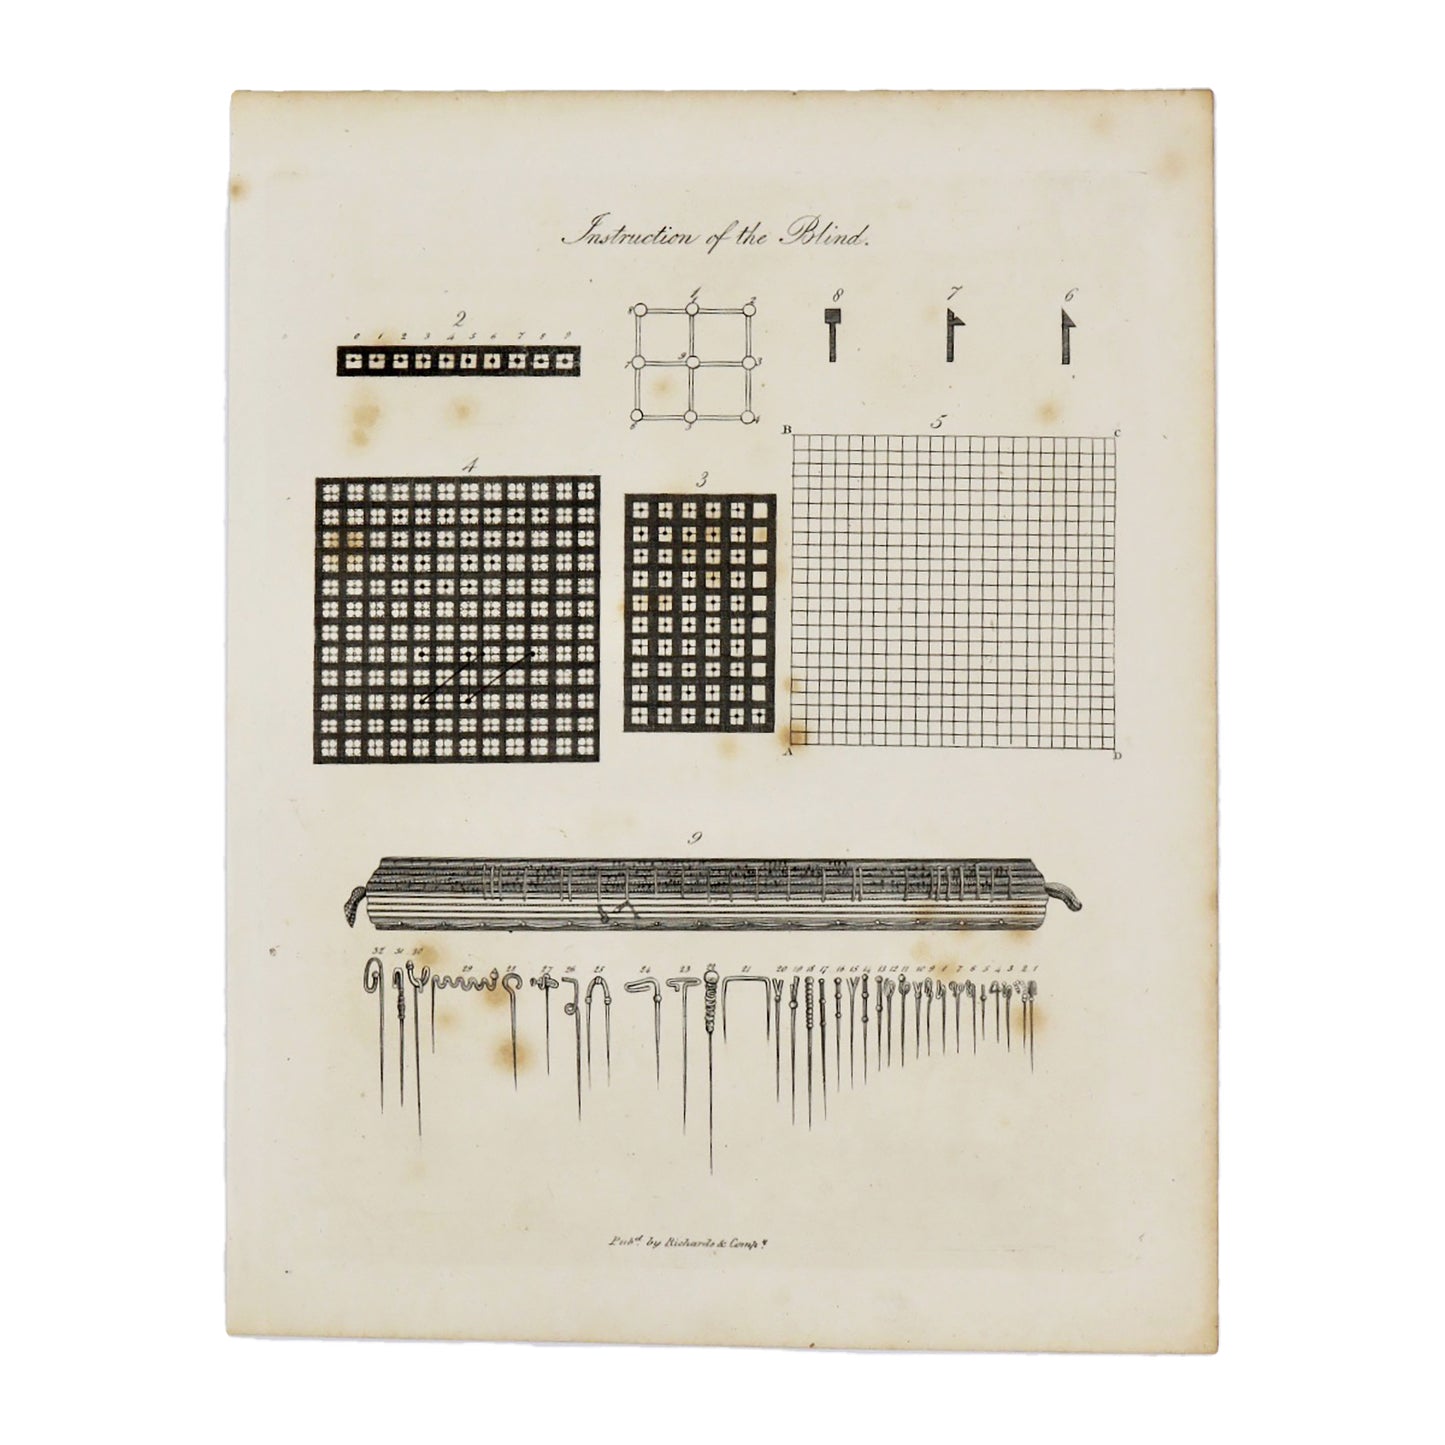 Instruction of the Blind  Antique 1820 Engraving from "The Modern Encyclopedia: The Latest Discoveries in each Department of Knowledge."  1820s etching depicting early tools for Braille.  Measures 10.5 x 8.25 inches.